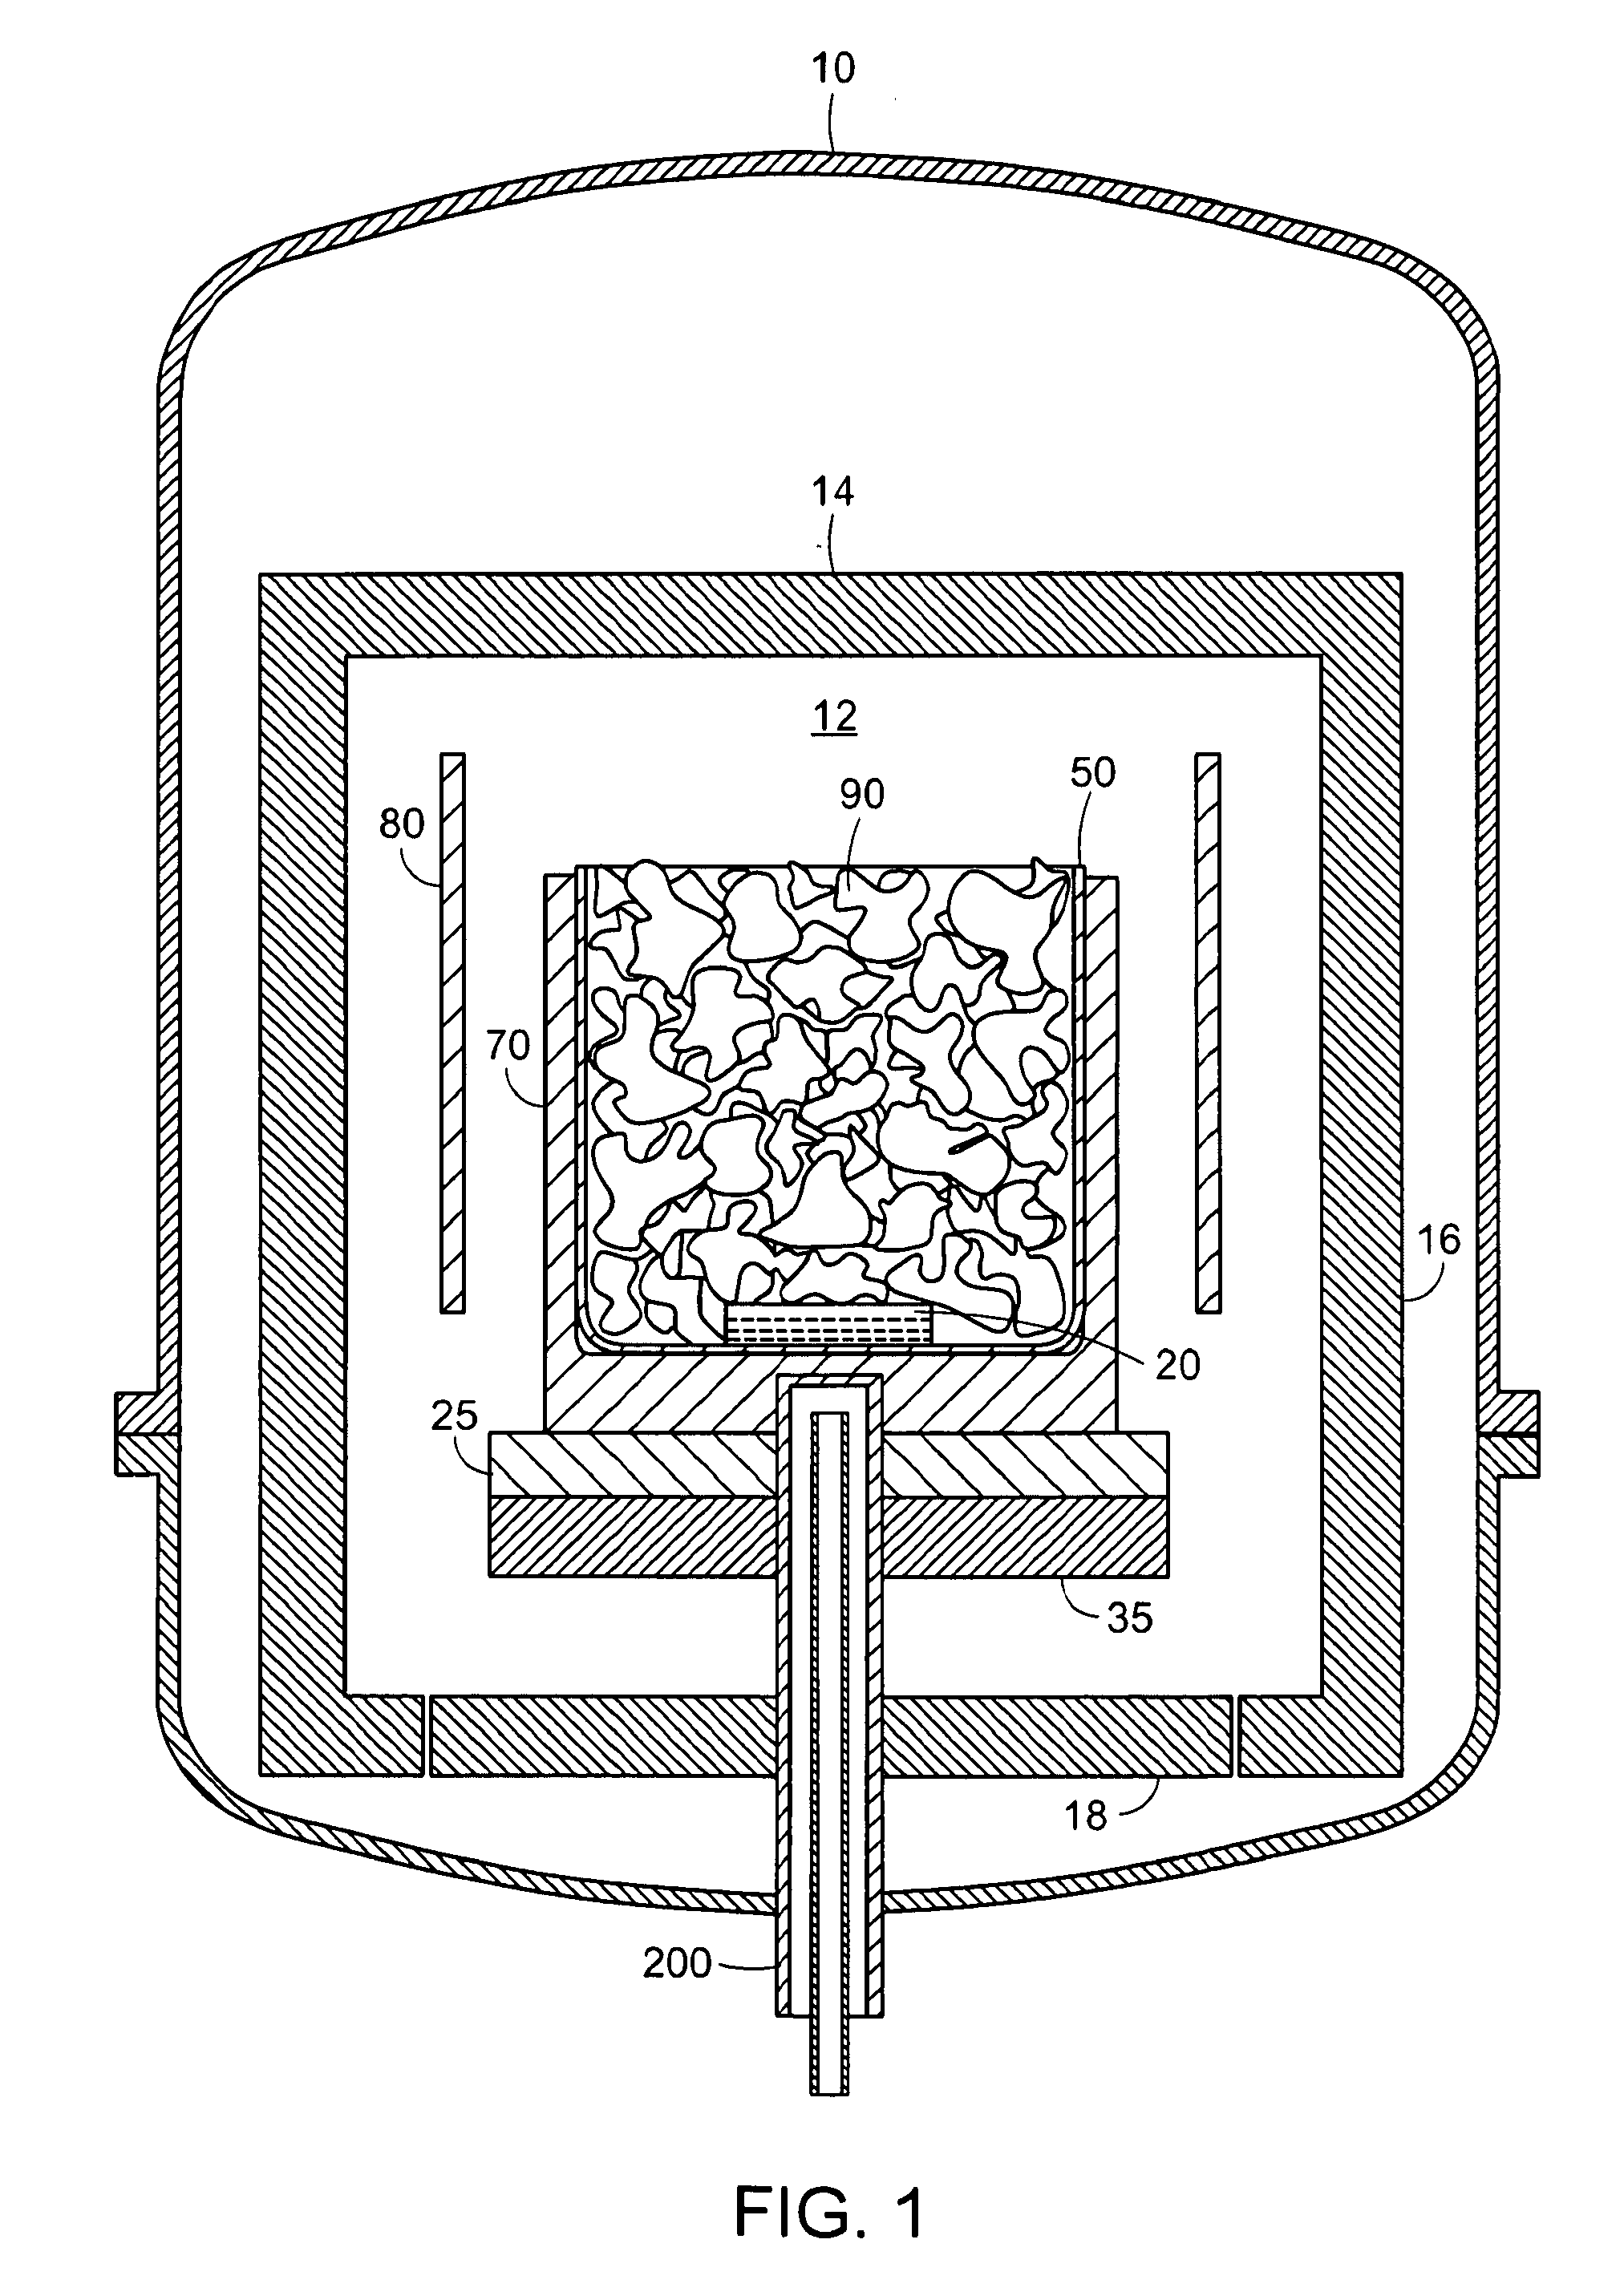 Systems and methods for growing monocrystalline silicon ingots by directional solidification